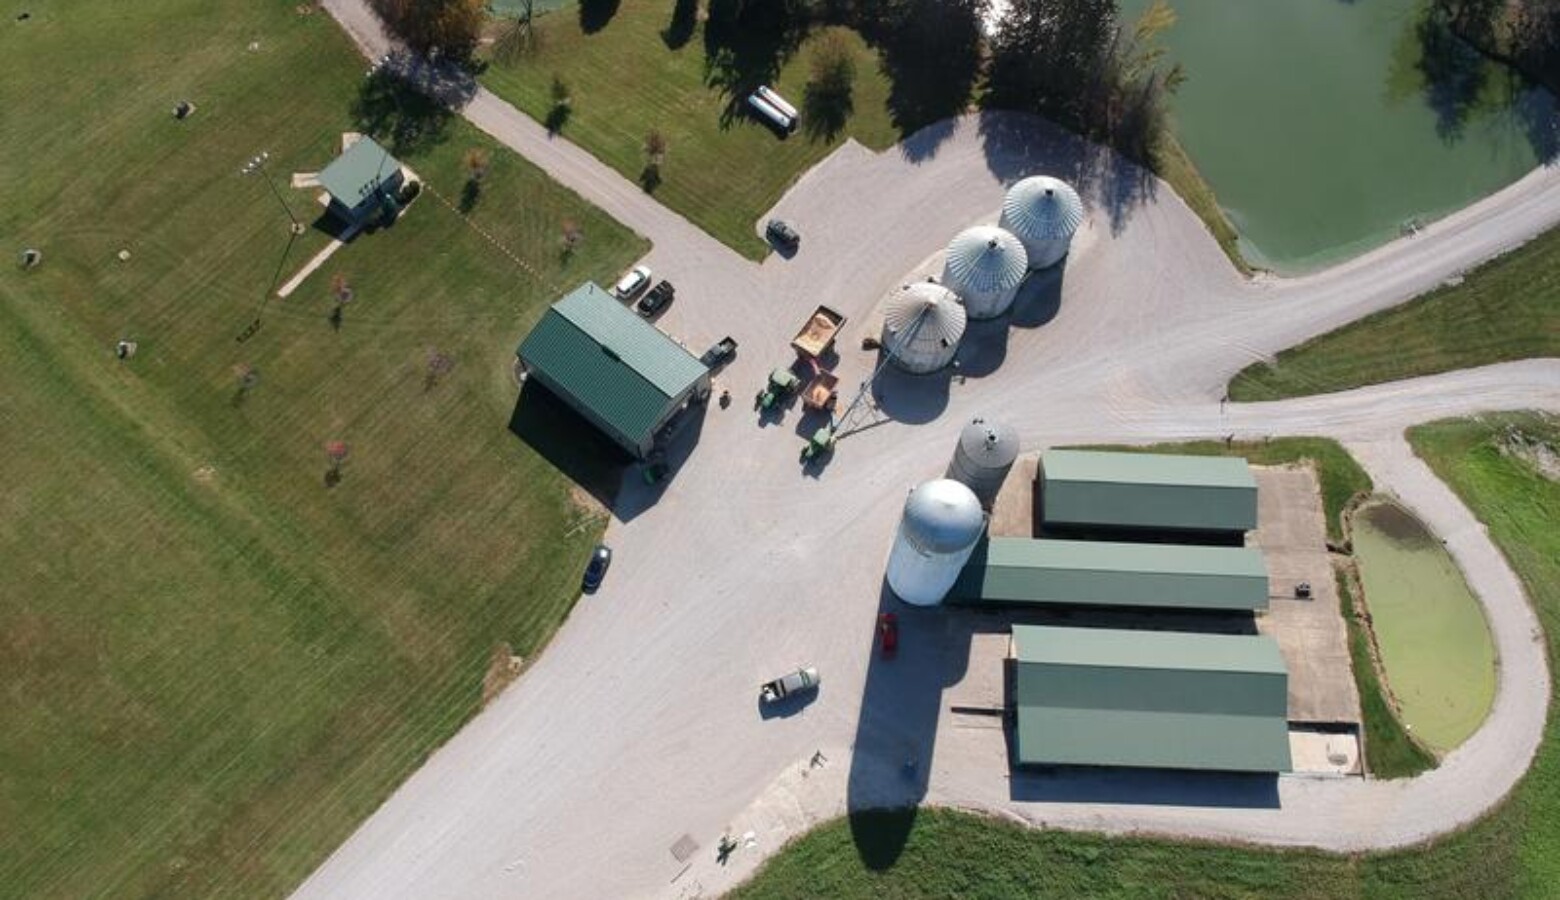 The school's farm campus is located in Morgan County. (Photo courtesy of Indiana Agriculture and Technology school)